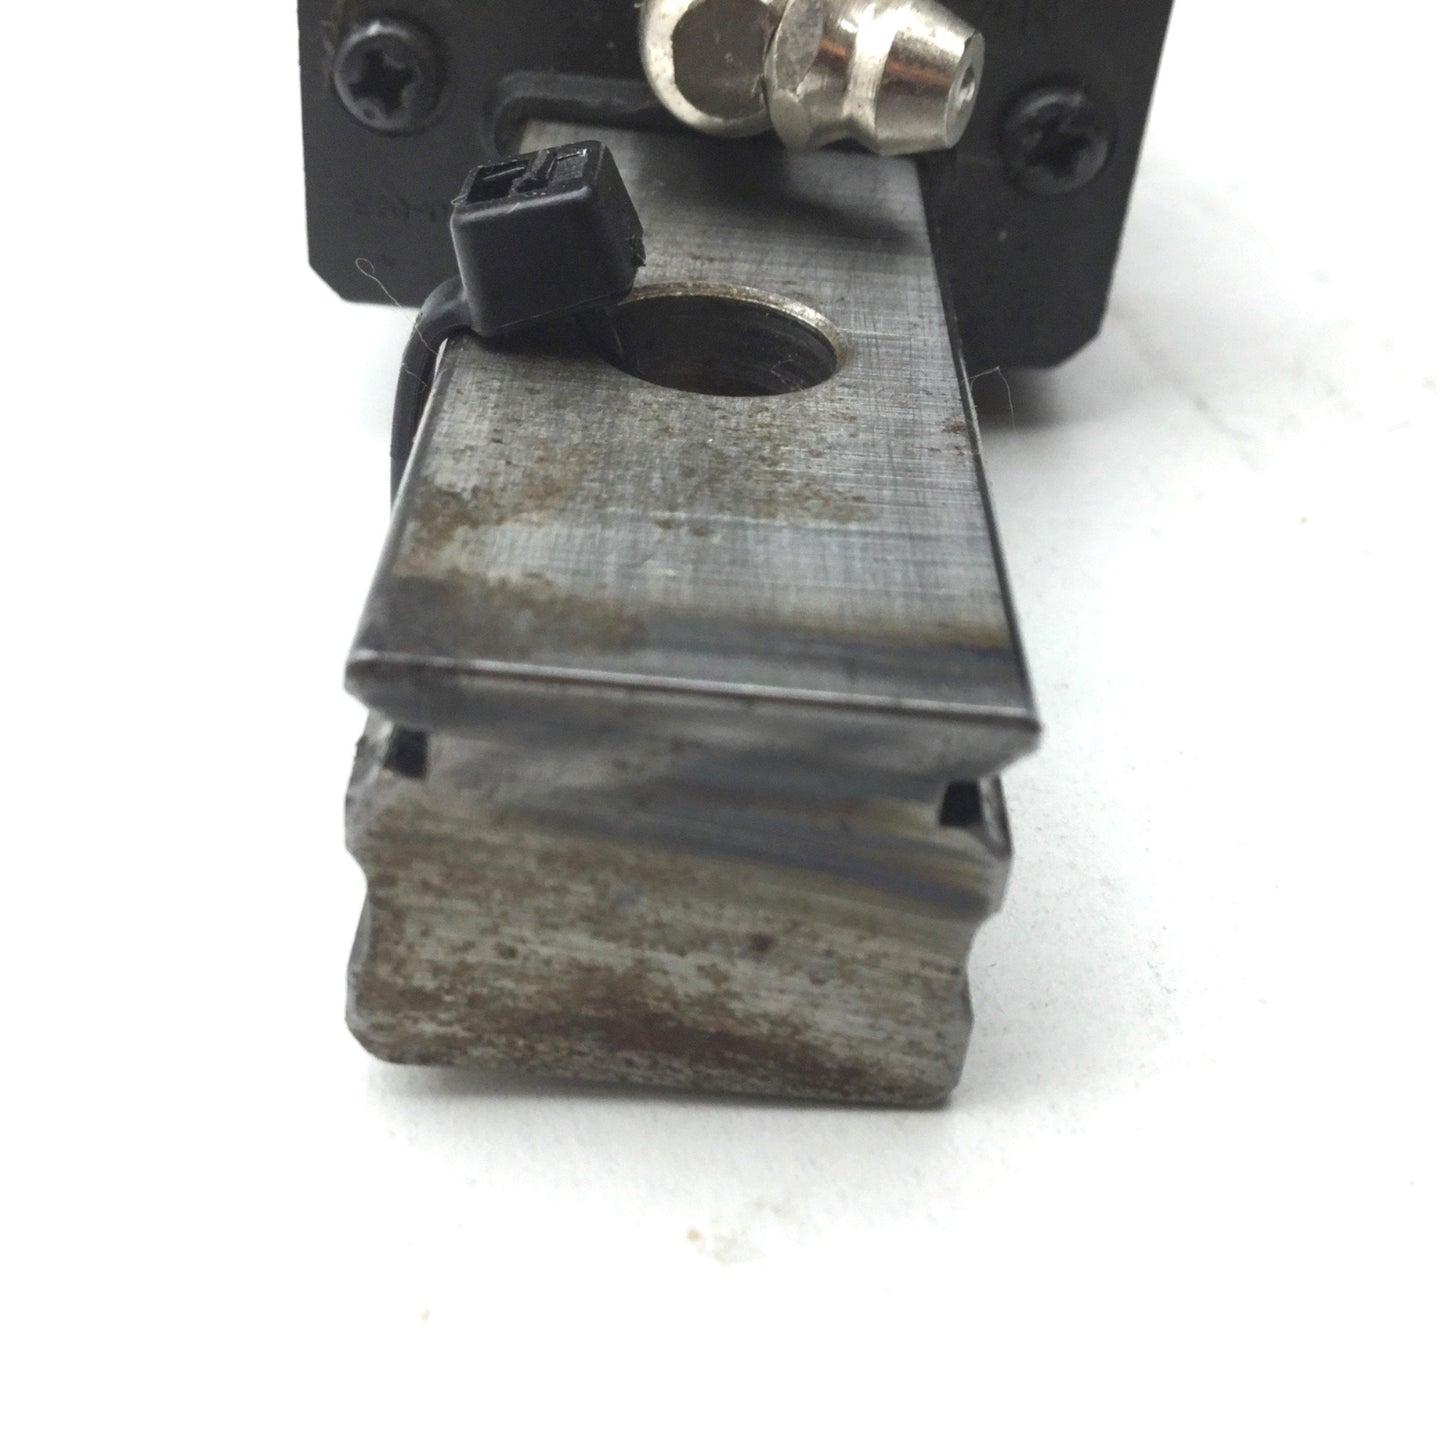 Used IKO LWES 20 Linear Ball Bearing Carriage Block Slides (2x) w/ 230mm Guide Rail